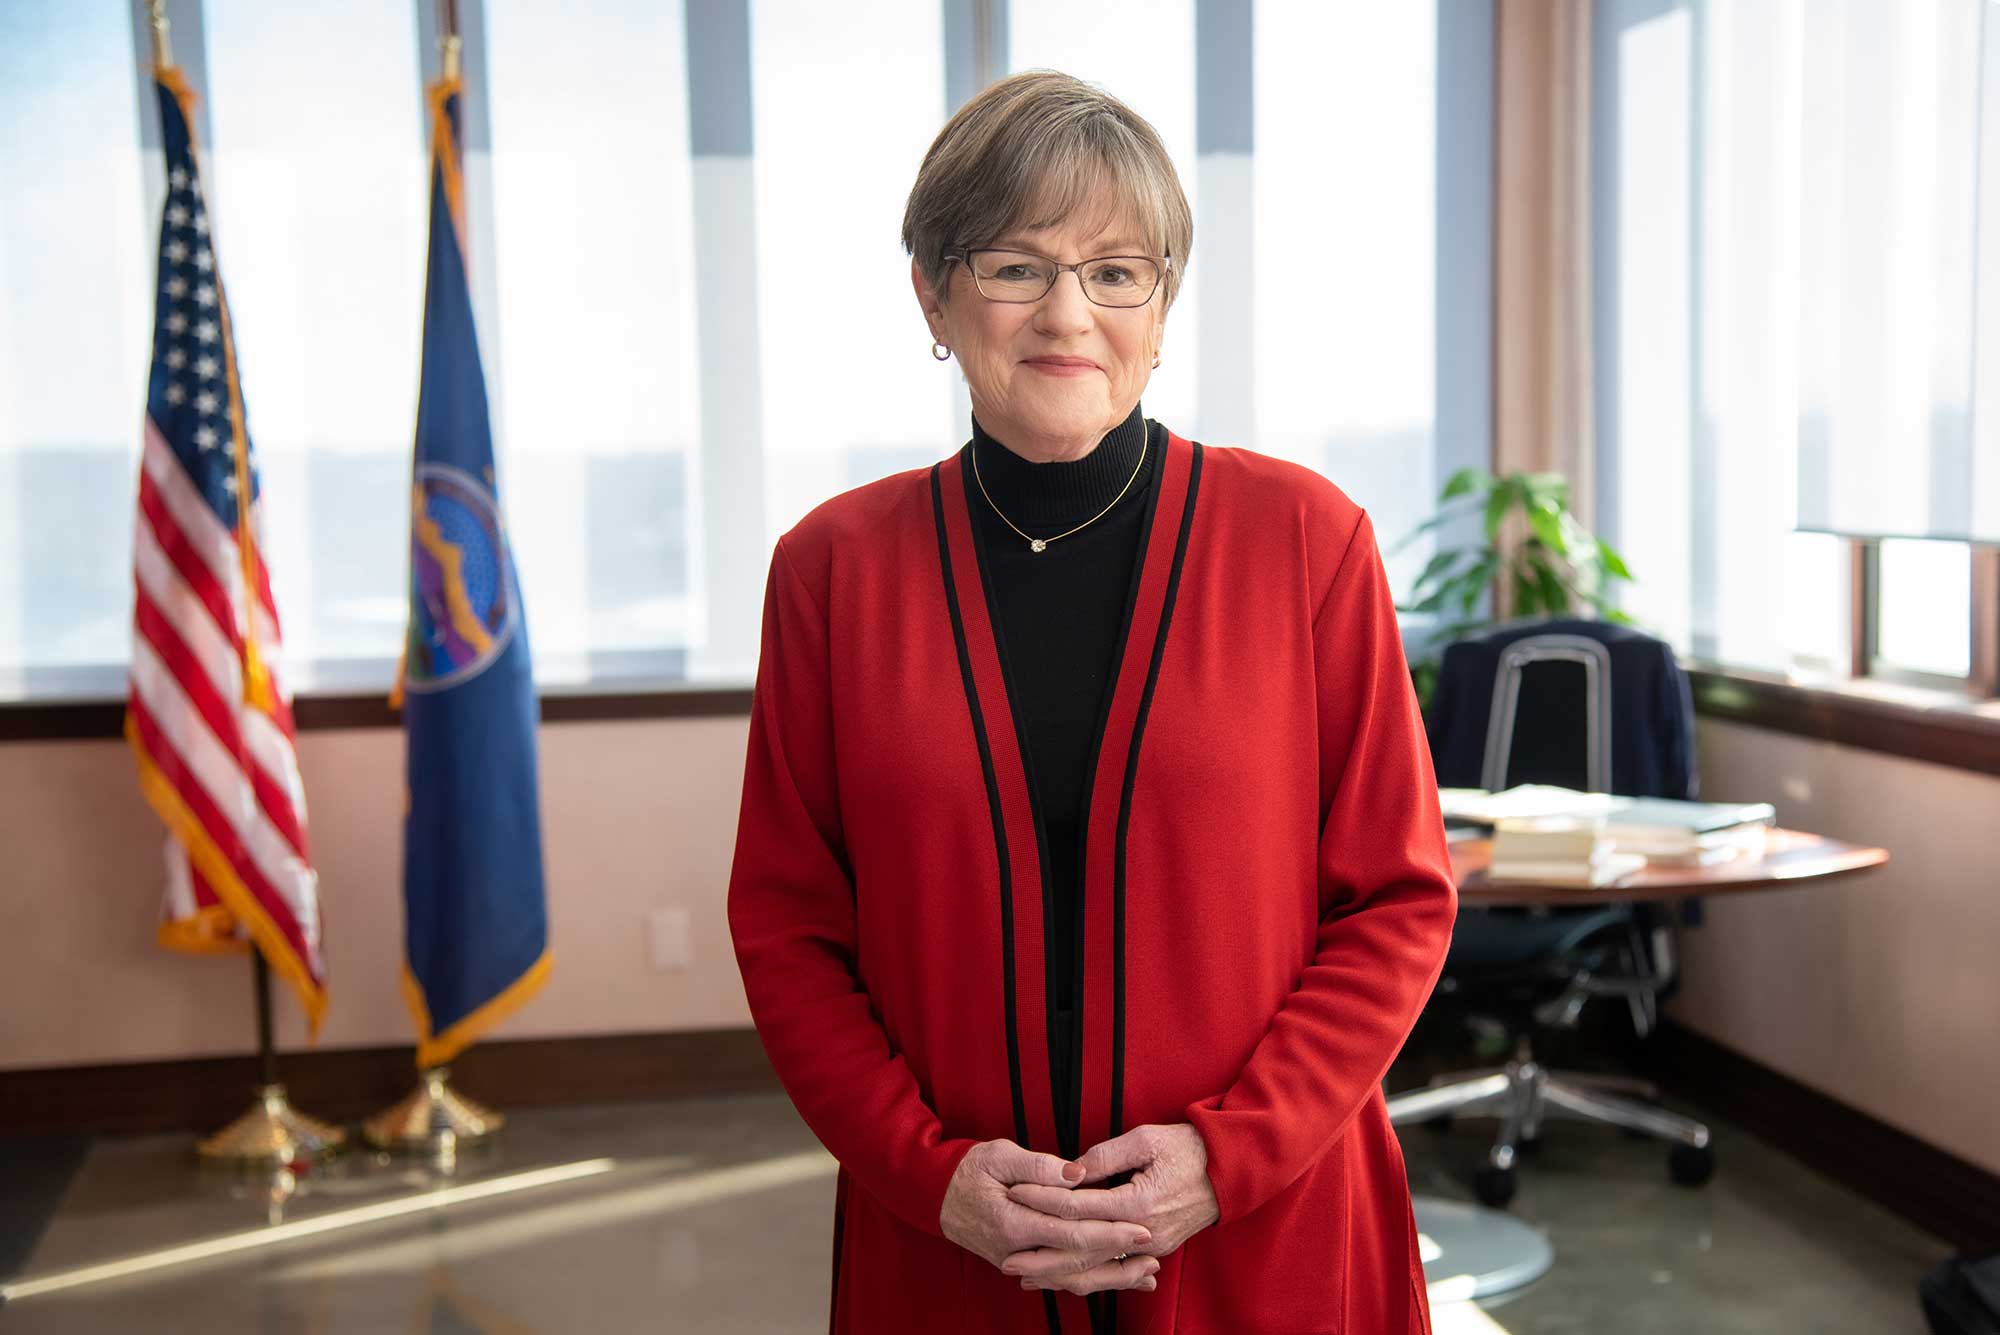  Laura Kelly for governor 2022